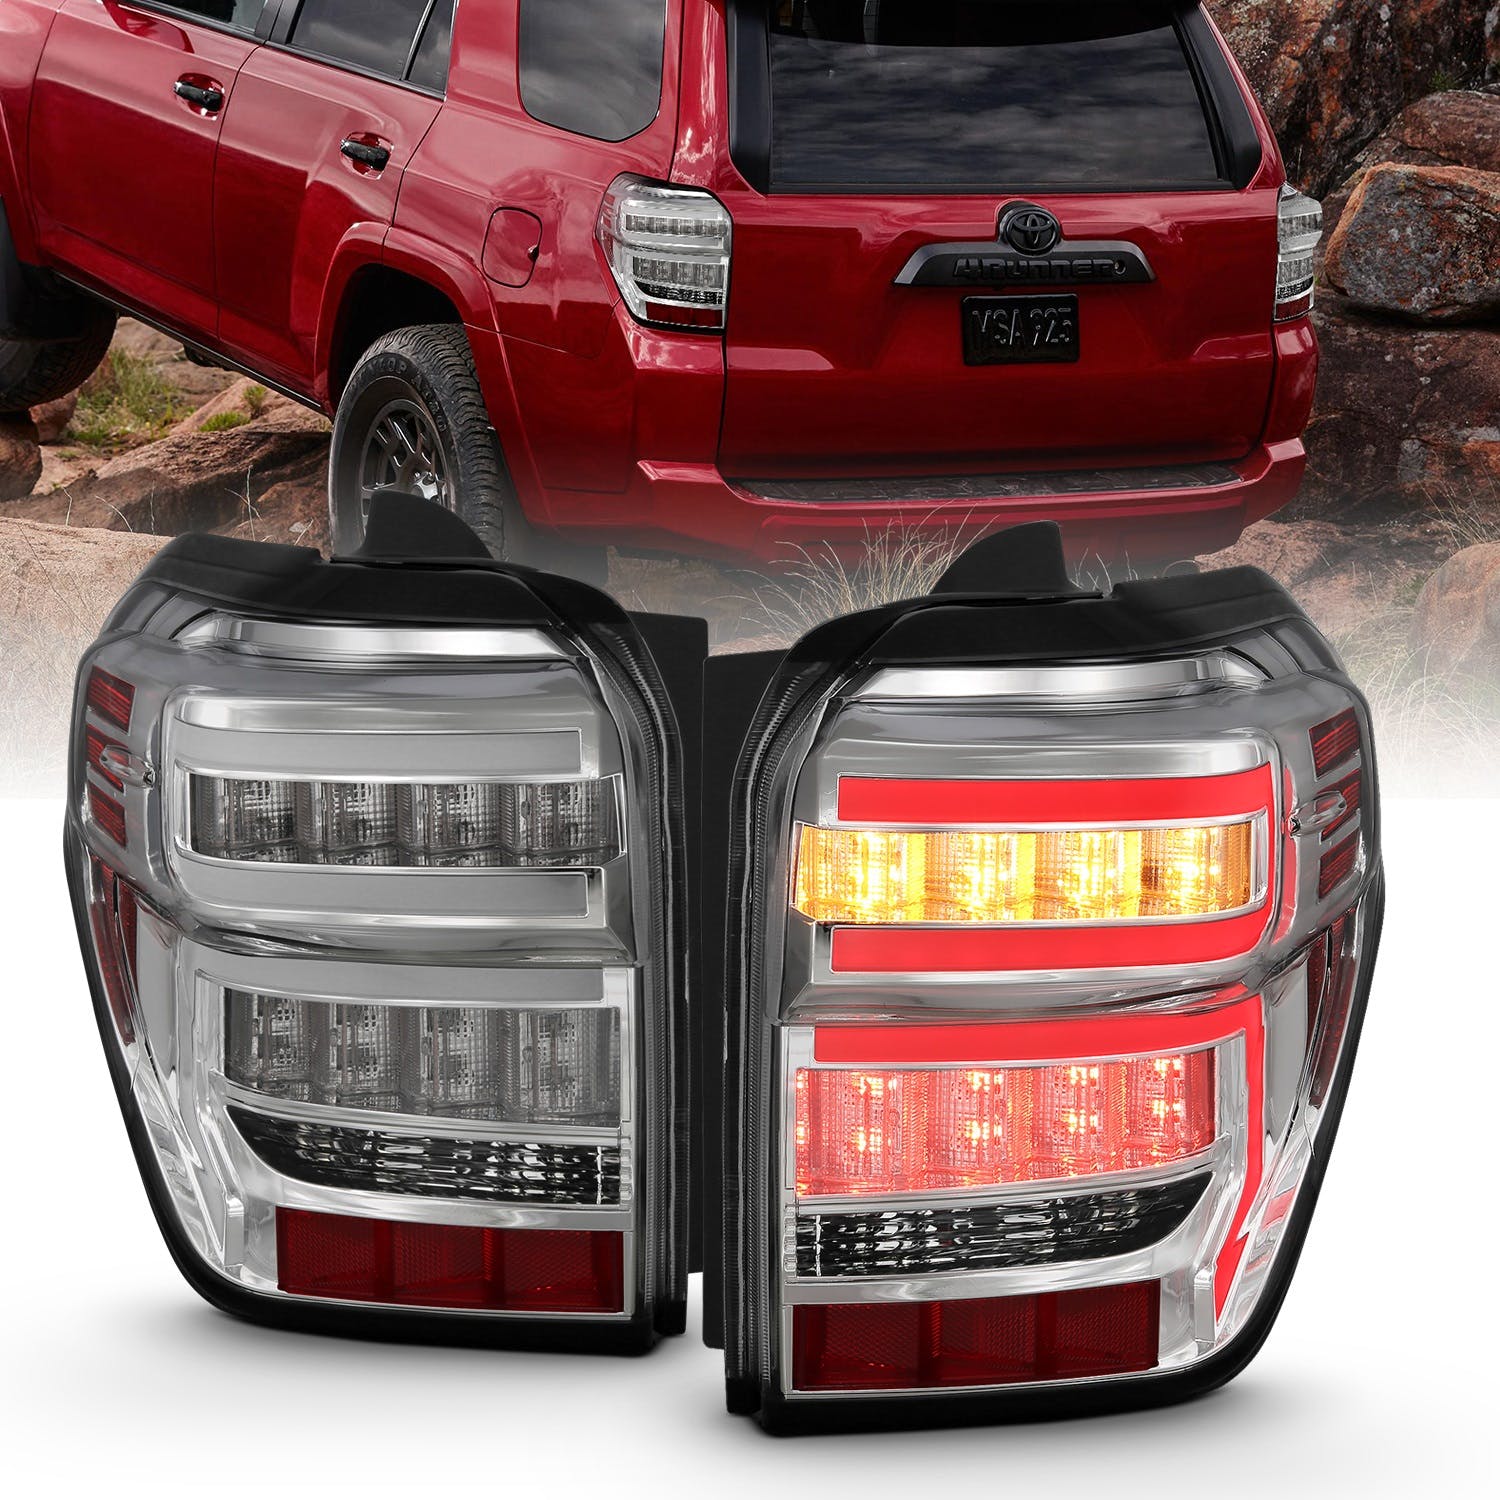 AnzoUSA 311313 Tail Lights Chrome Housing Clear Lens Red Light Bar With sequential